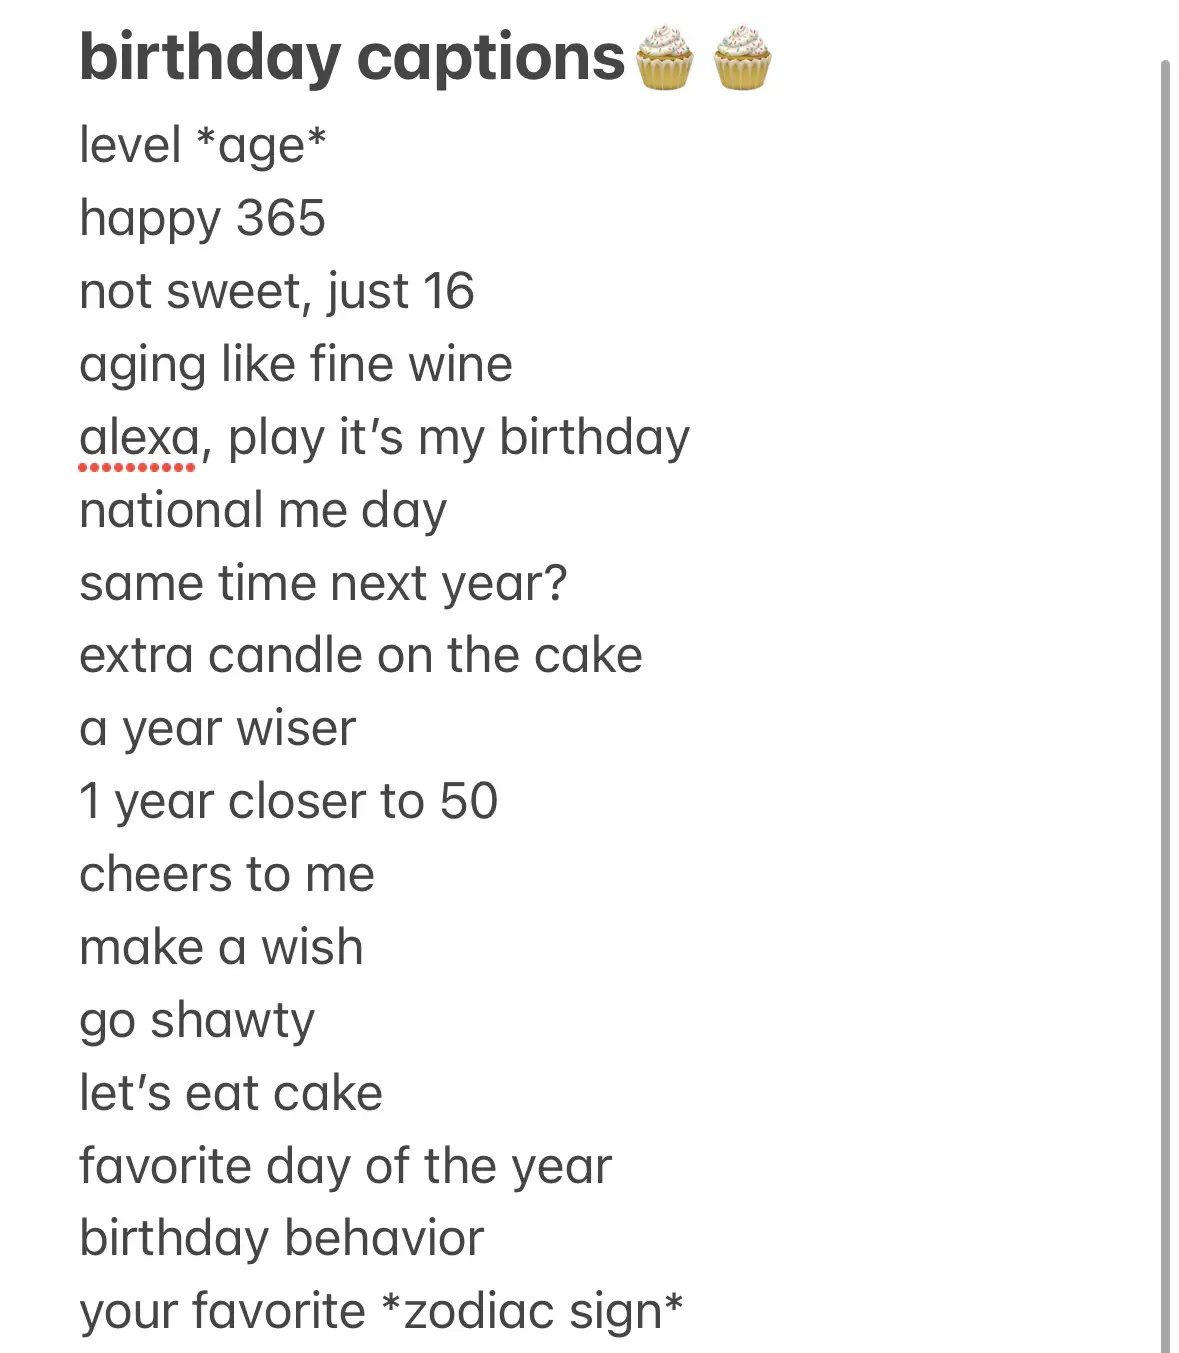  A list of wishes and celebrations for a birthday.